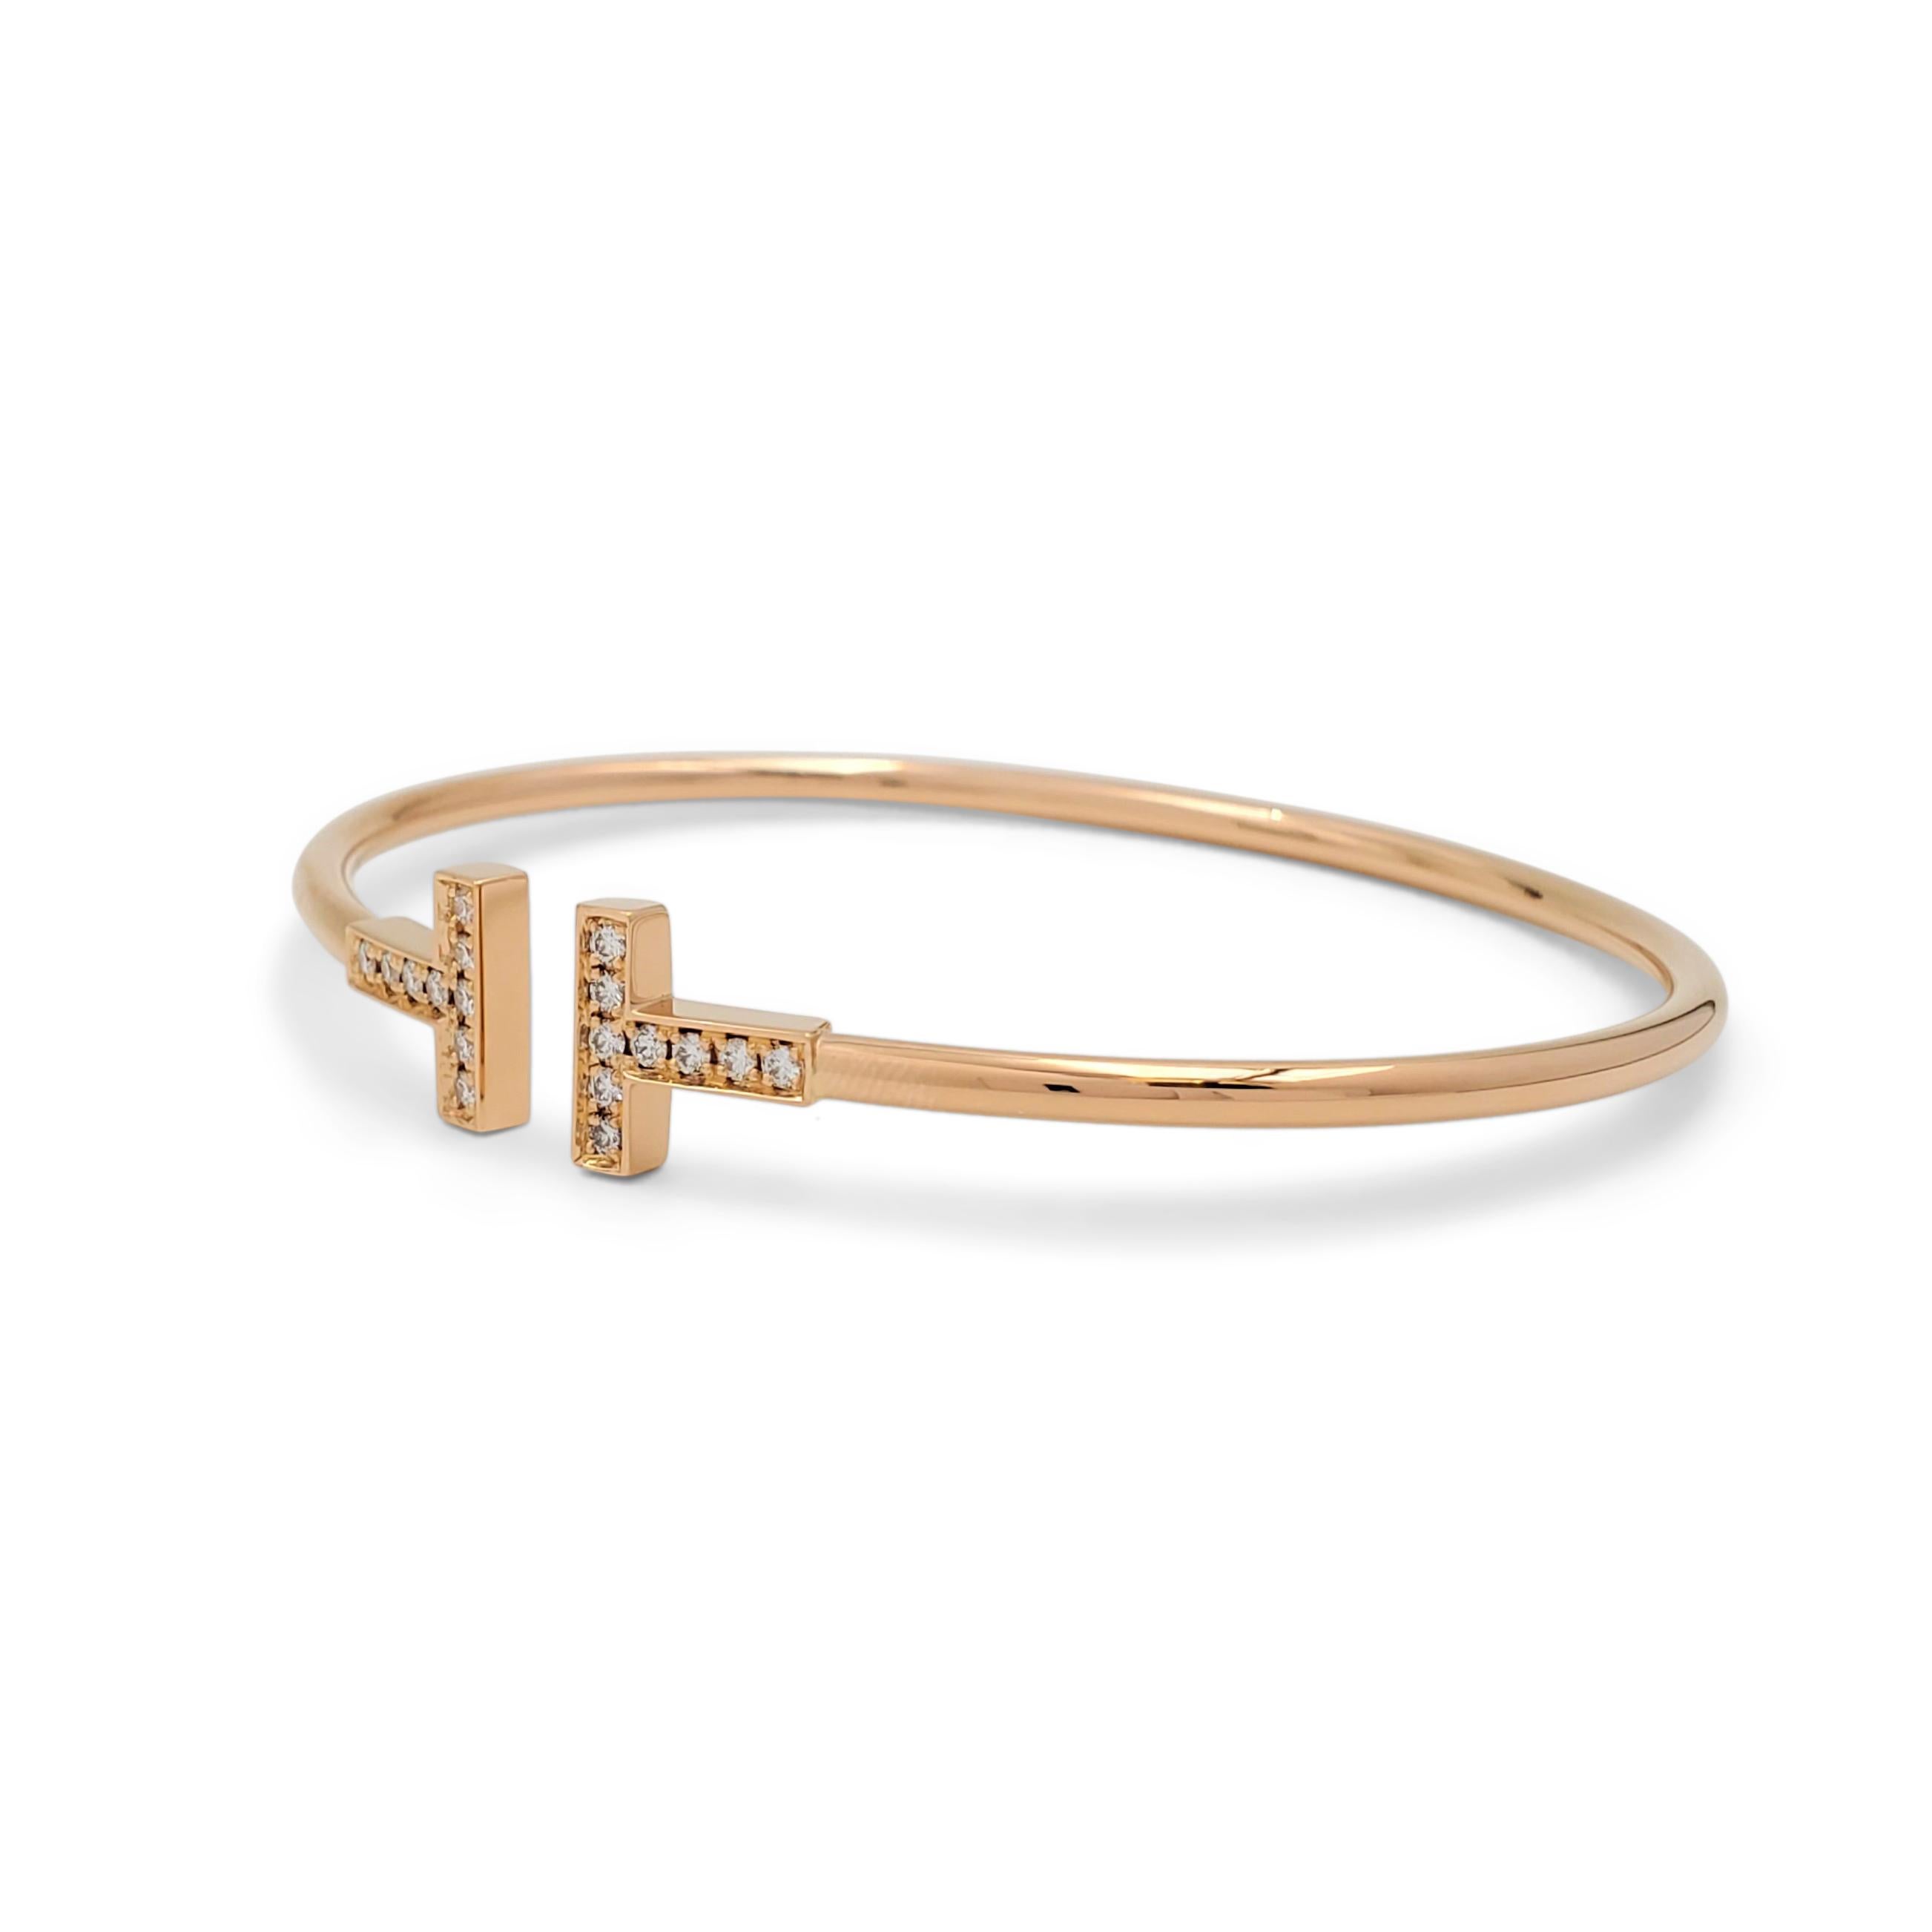 Authentic timeless Tiffany & Co. 'T Square' wire bracelet, inspired by the strong, clean lines of the letter T. Crafted in 18 karat rose gold and set with an estimated 0.22 carats of round brilliant cut diamonds. Signed T&Co., Au750. The bracelet is